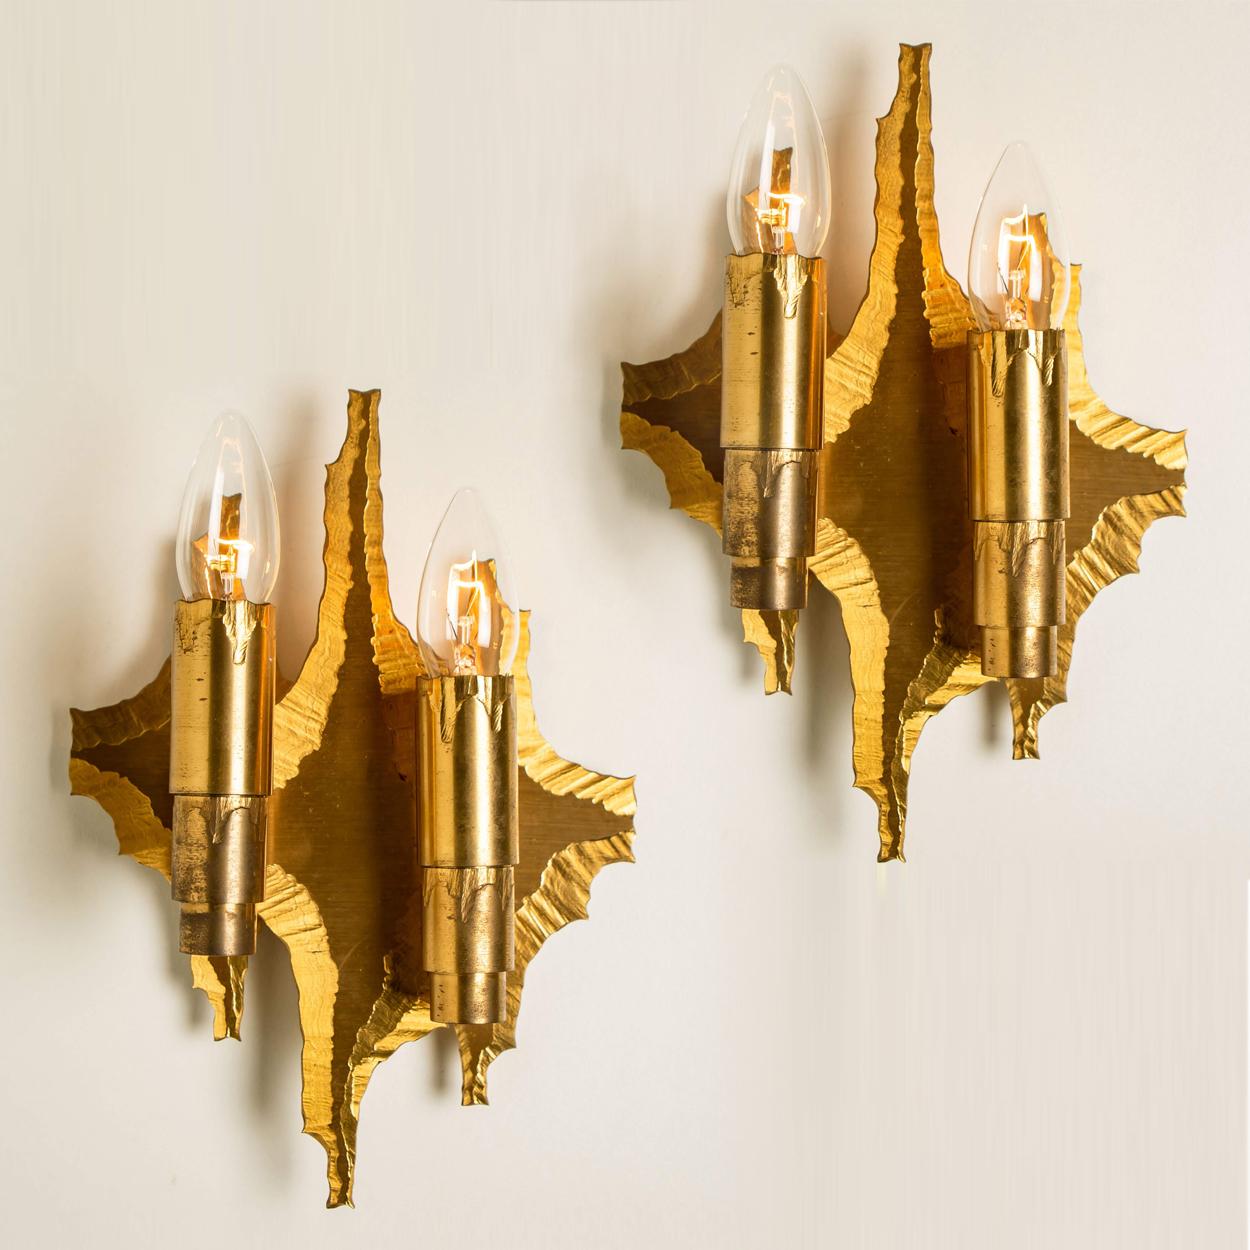 A pair of Brutalist wall sconces from the 1970s, Sweden. An absolute strong and sculptural design! One of a kind design. 

Cleaned and well-wired, in full working order and ready to use. The fixtures are in excellent condition. Each with 2 E14